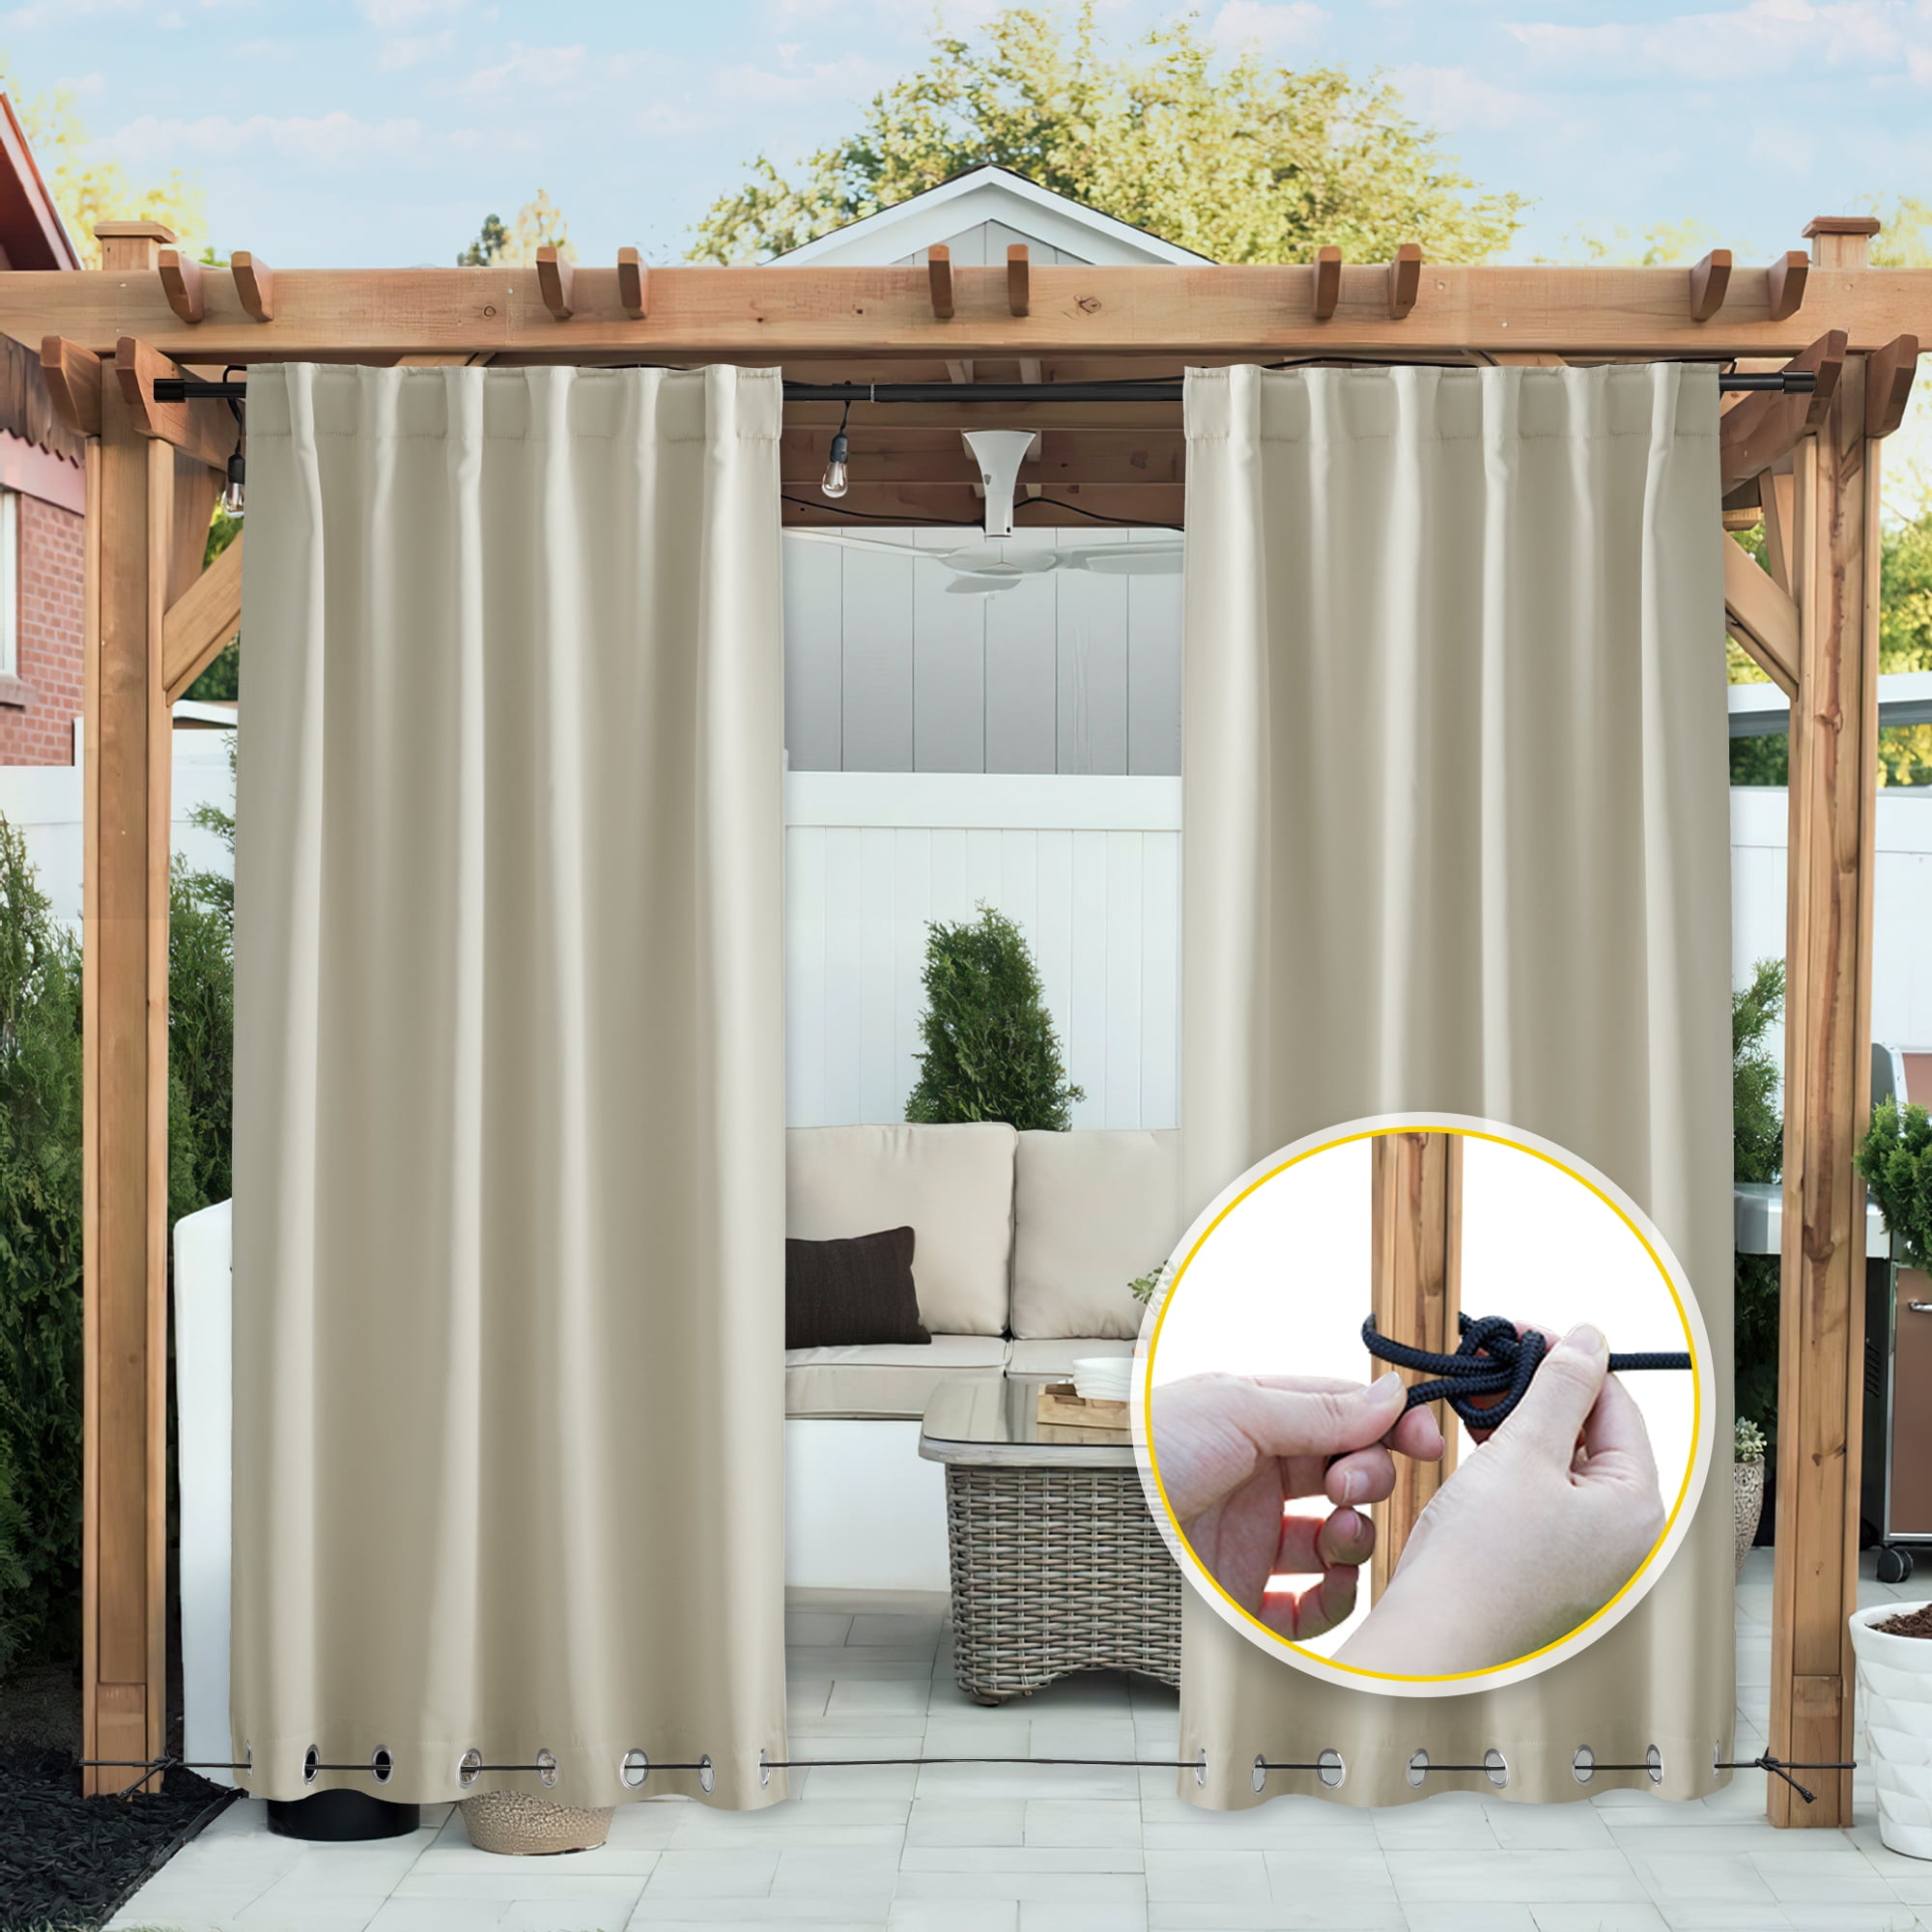 Coodeto 2 Panels Weighted Blackout Curtains Patio Waterproof Outdoor ...